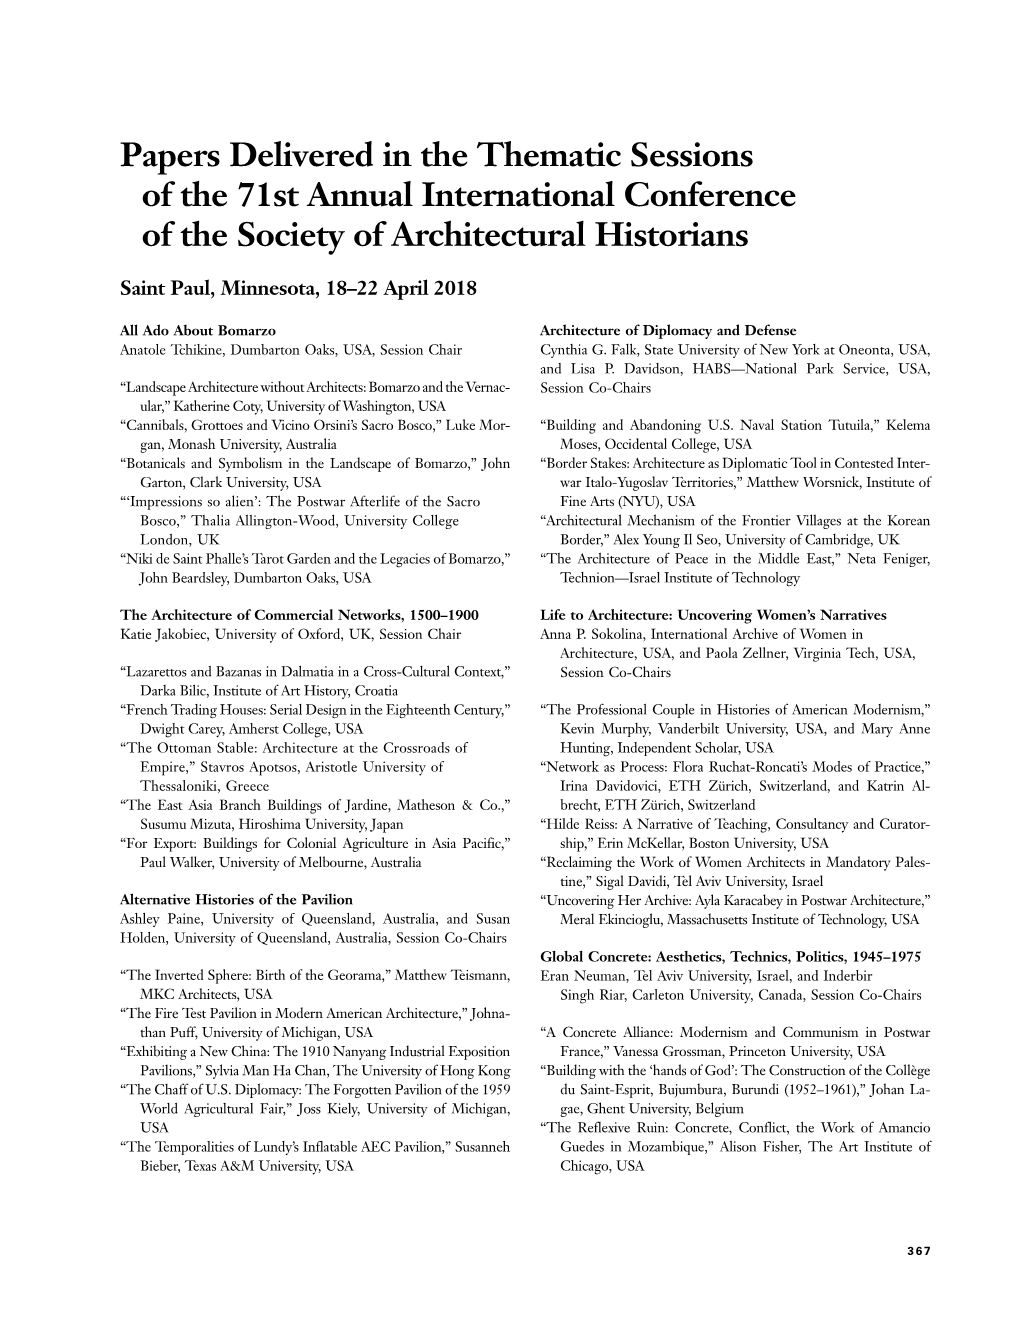 Papers Delivered in the Thematic Sessions of the 71St Annual International Conference of the Society of Architectural Historians